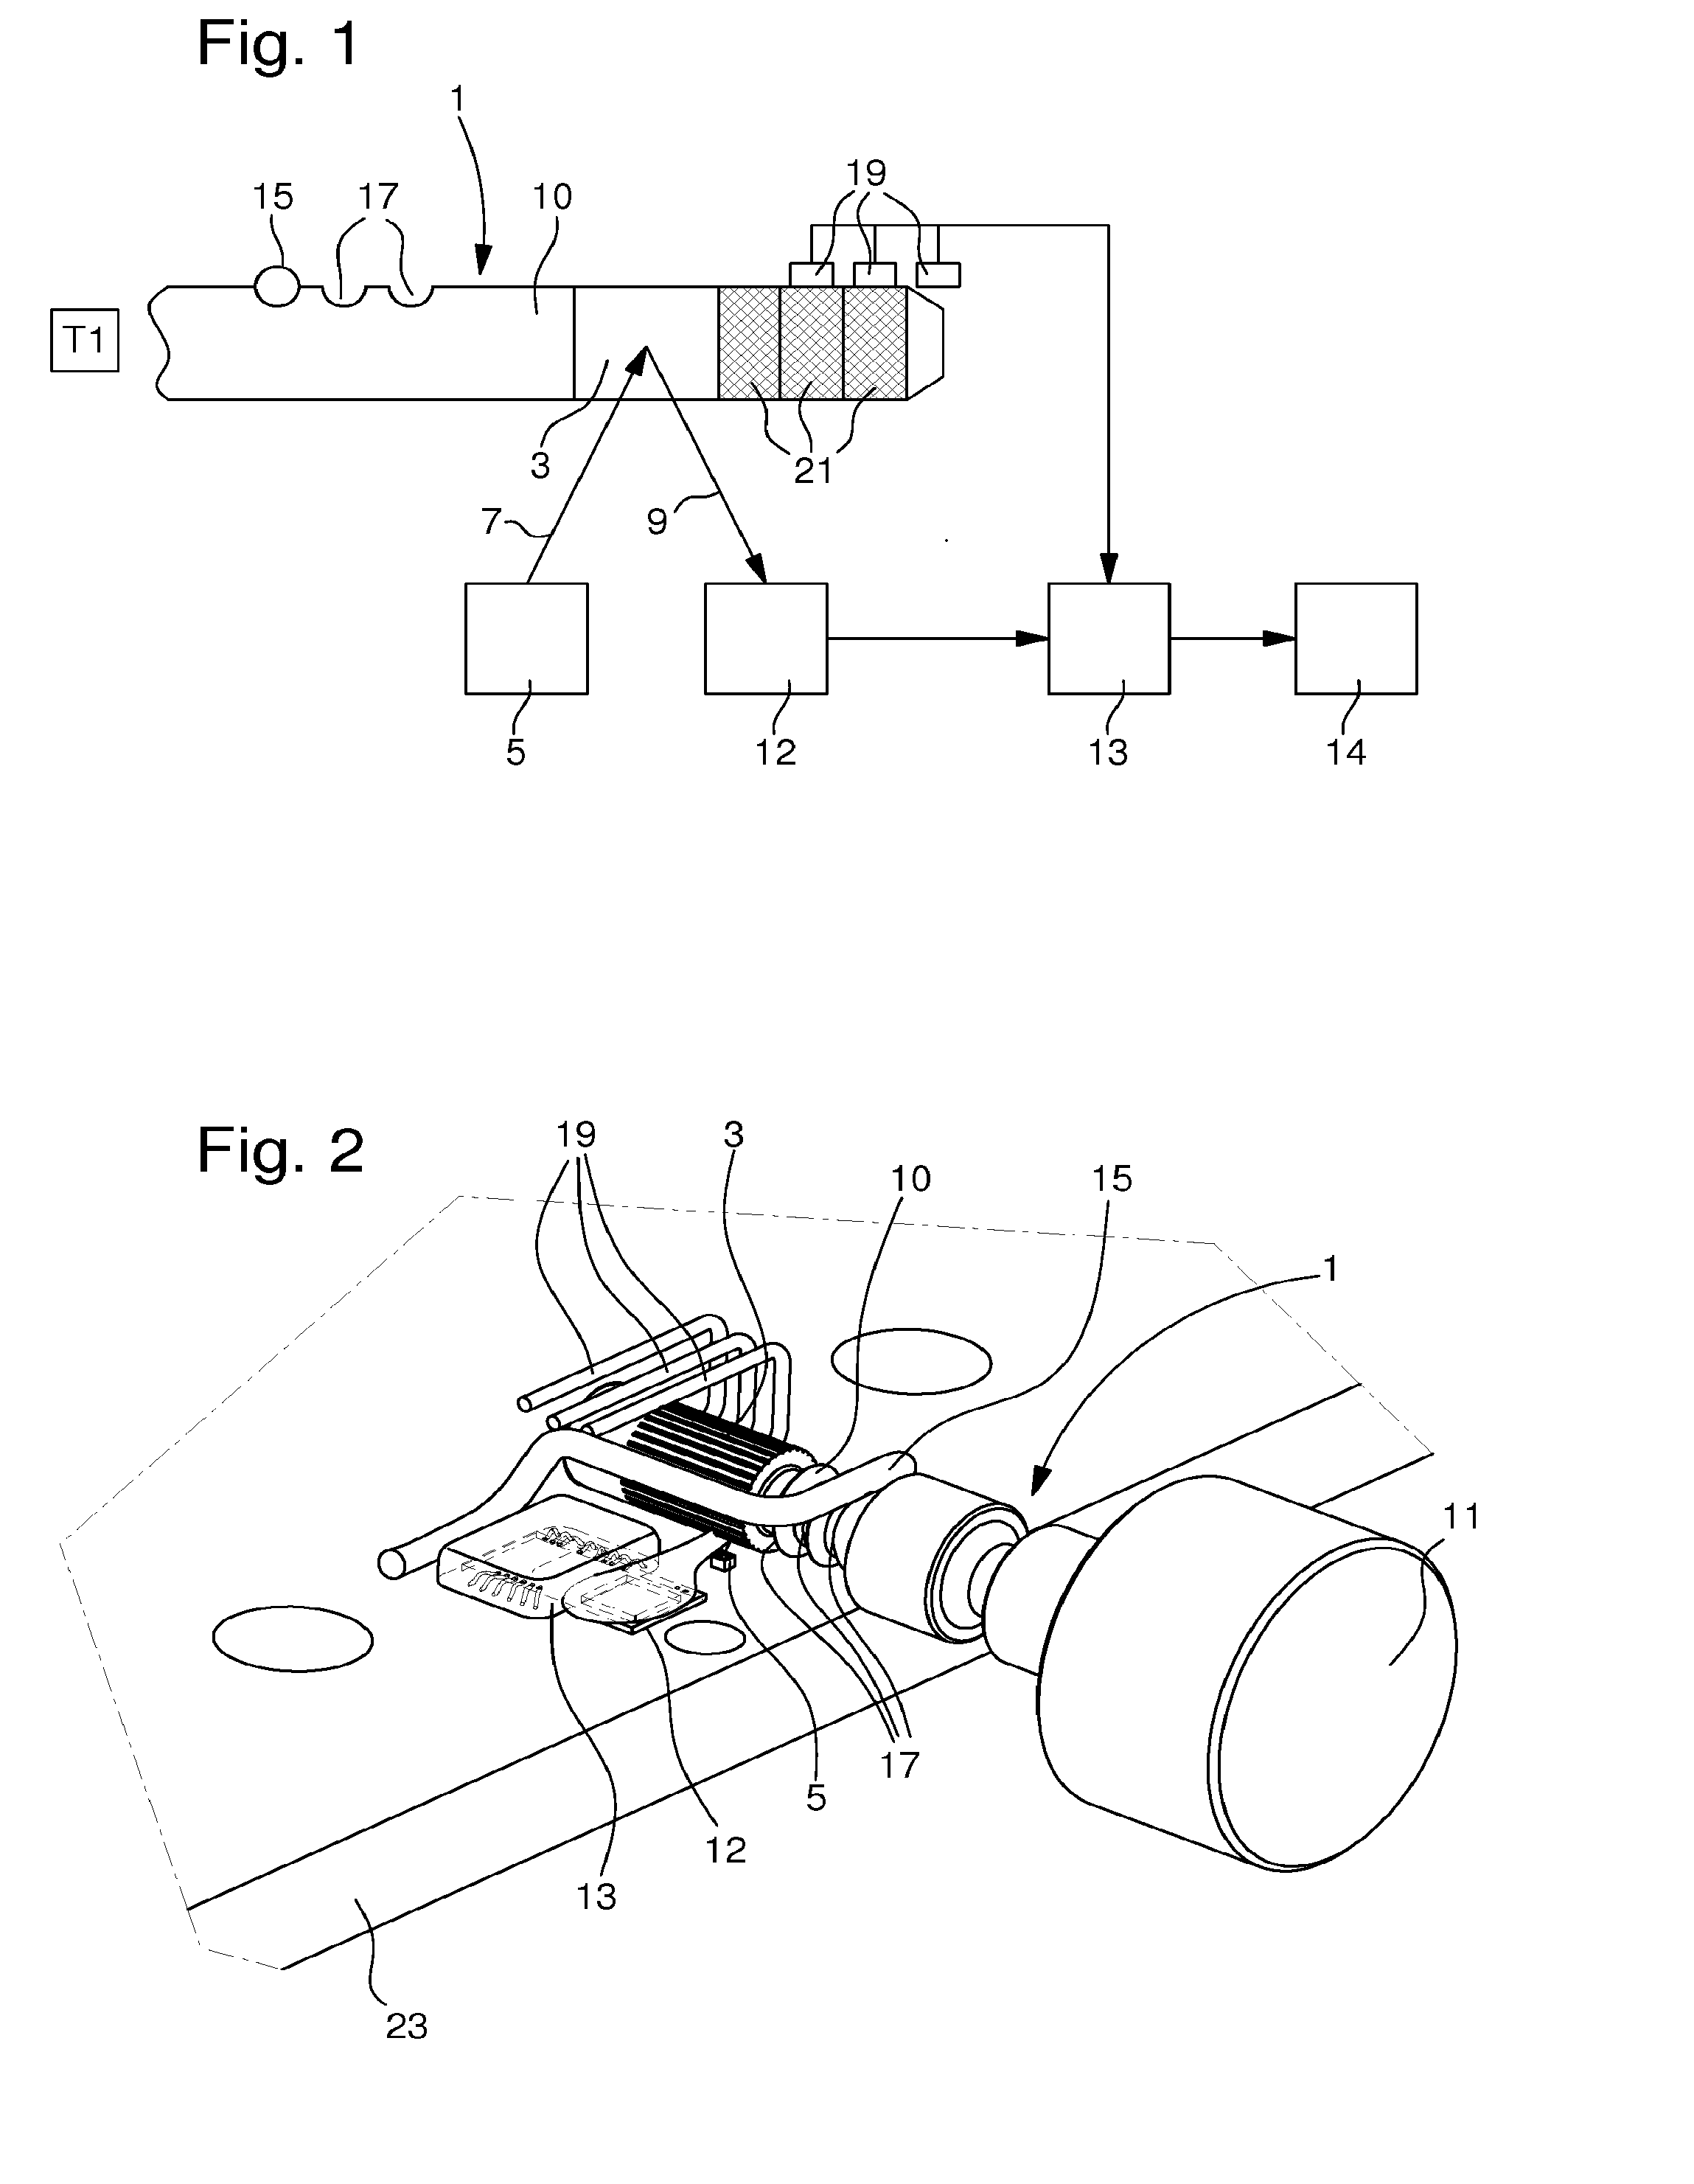 Optical position detection of a timepiece crown stem